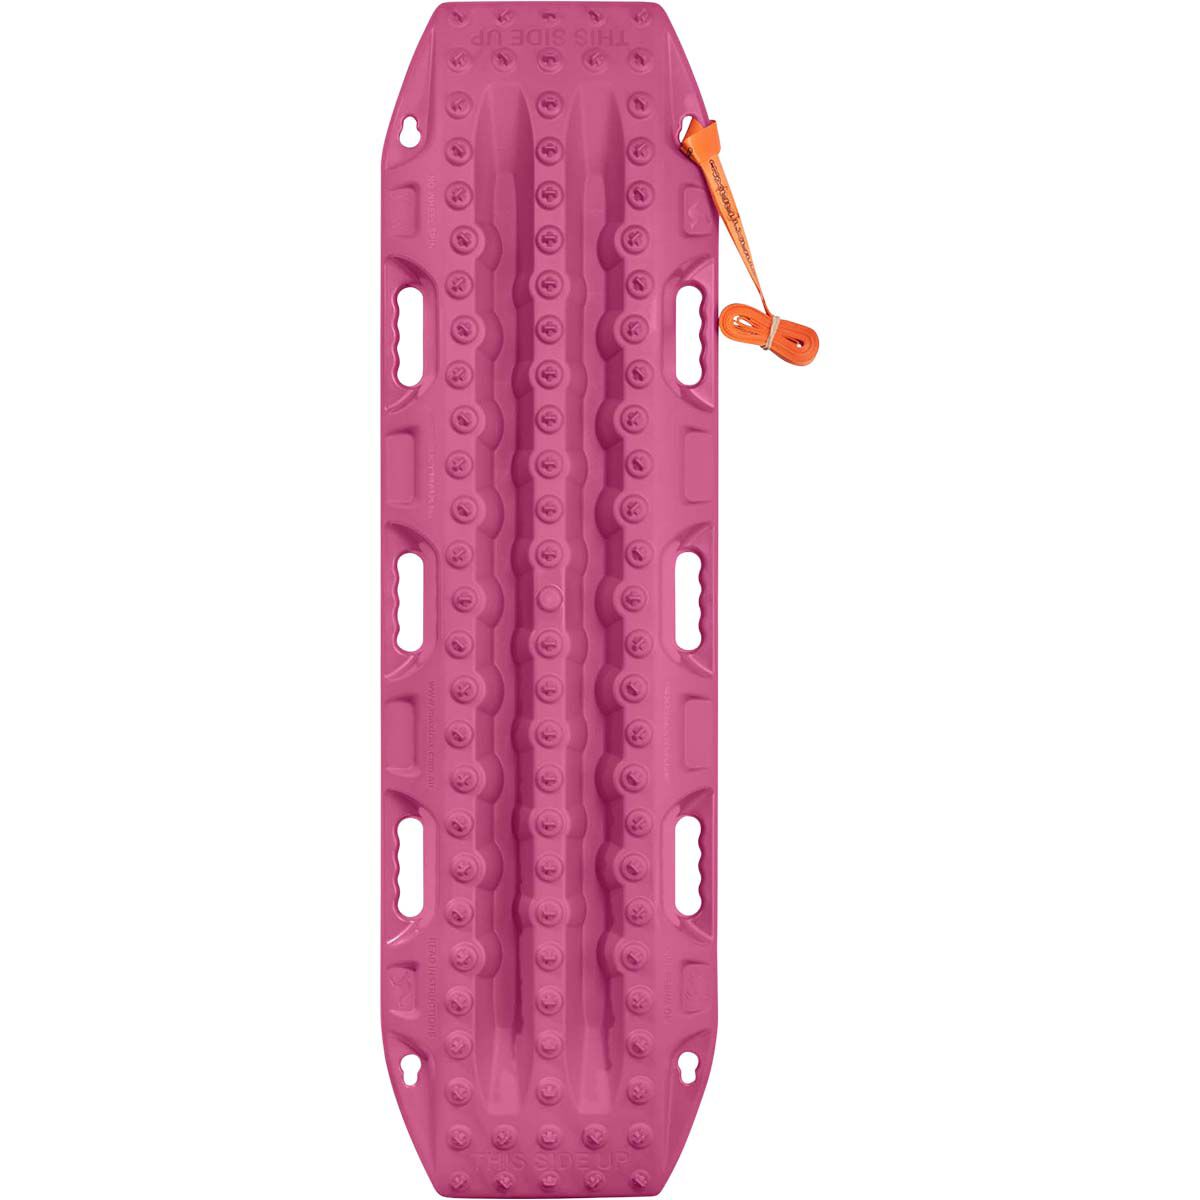 Maxtrax MKII Recovery Boards Pink, , bcf_hi-res